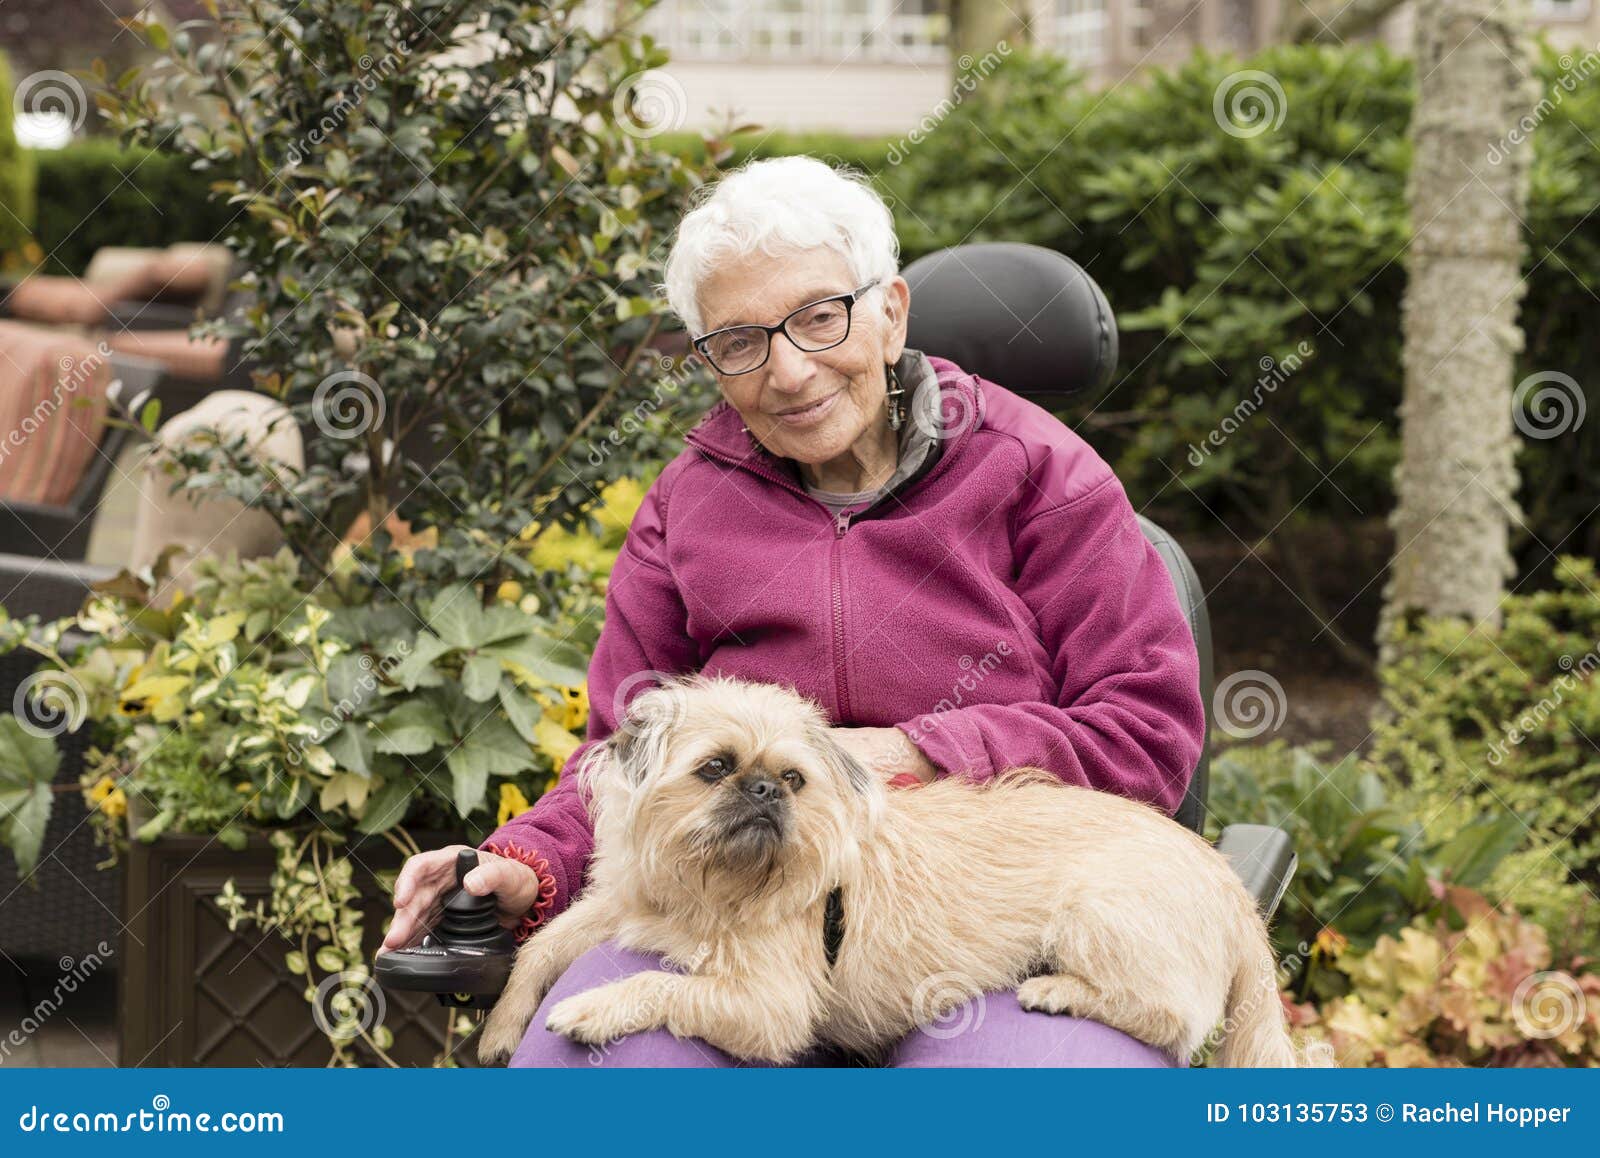 independent elderly woman outside in wheelchair with dog